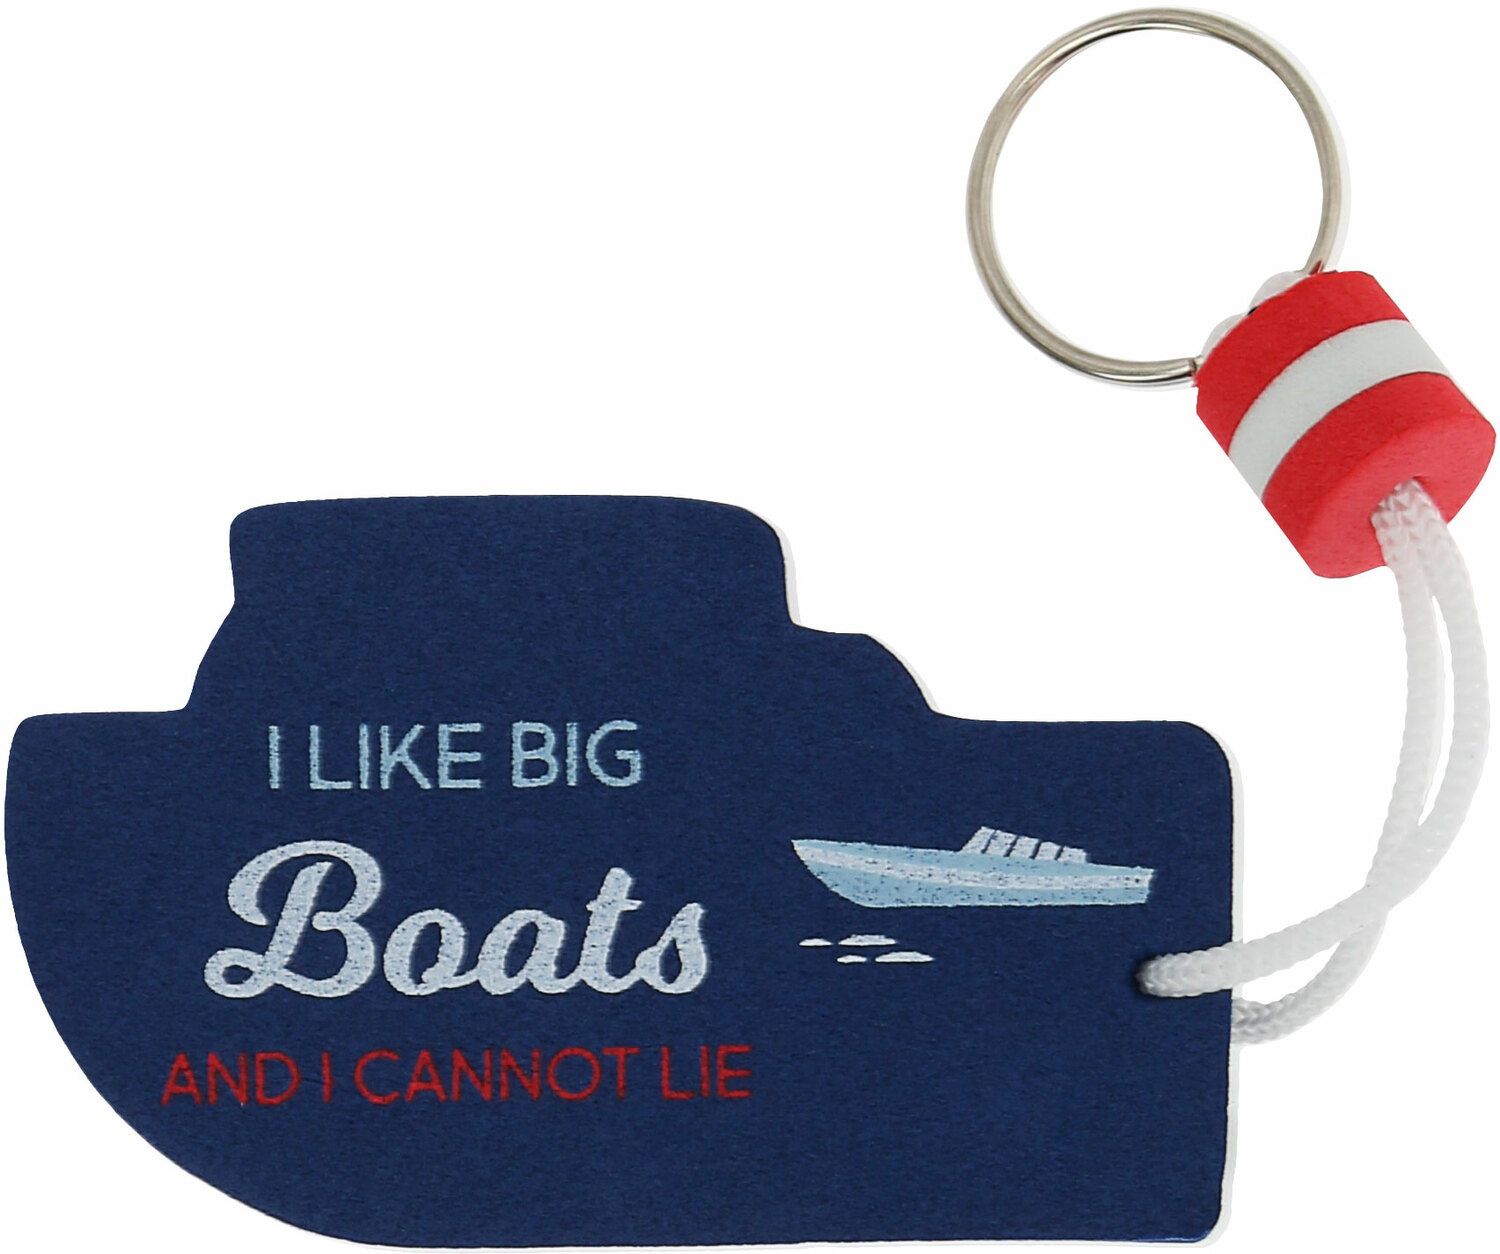 Big Boats by We People - Big Boats - Floating Key Chain